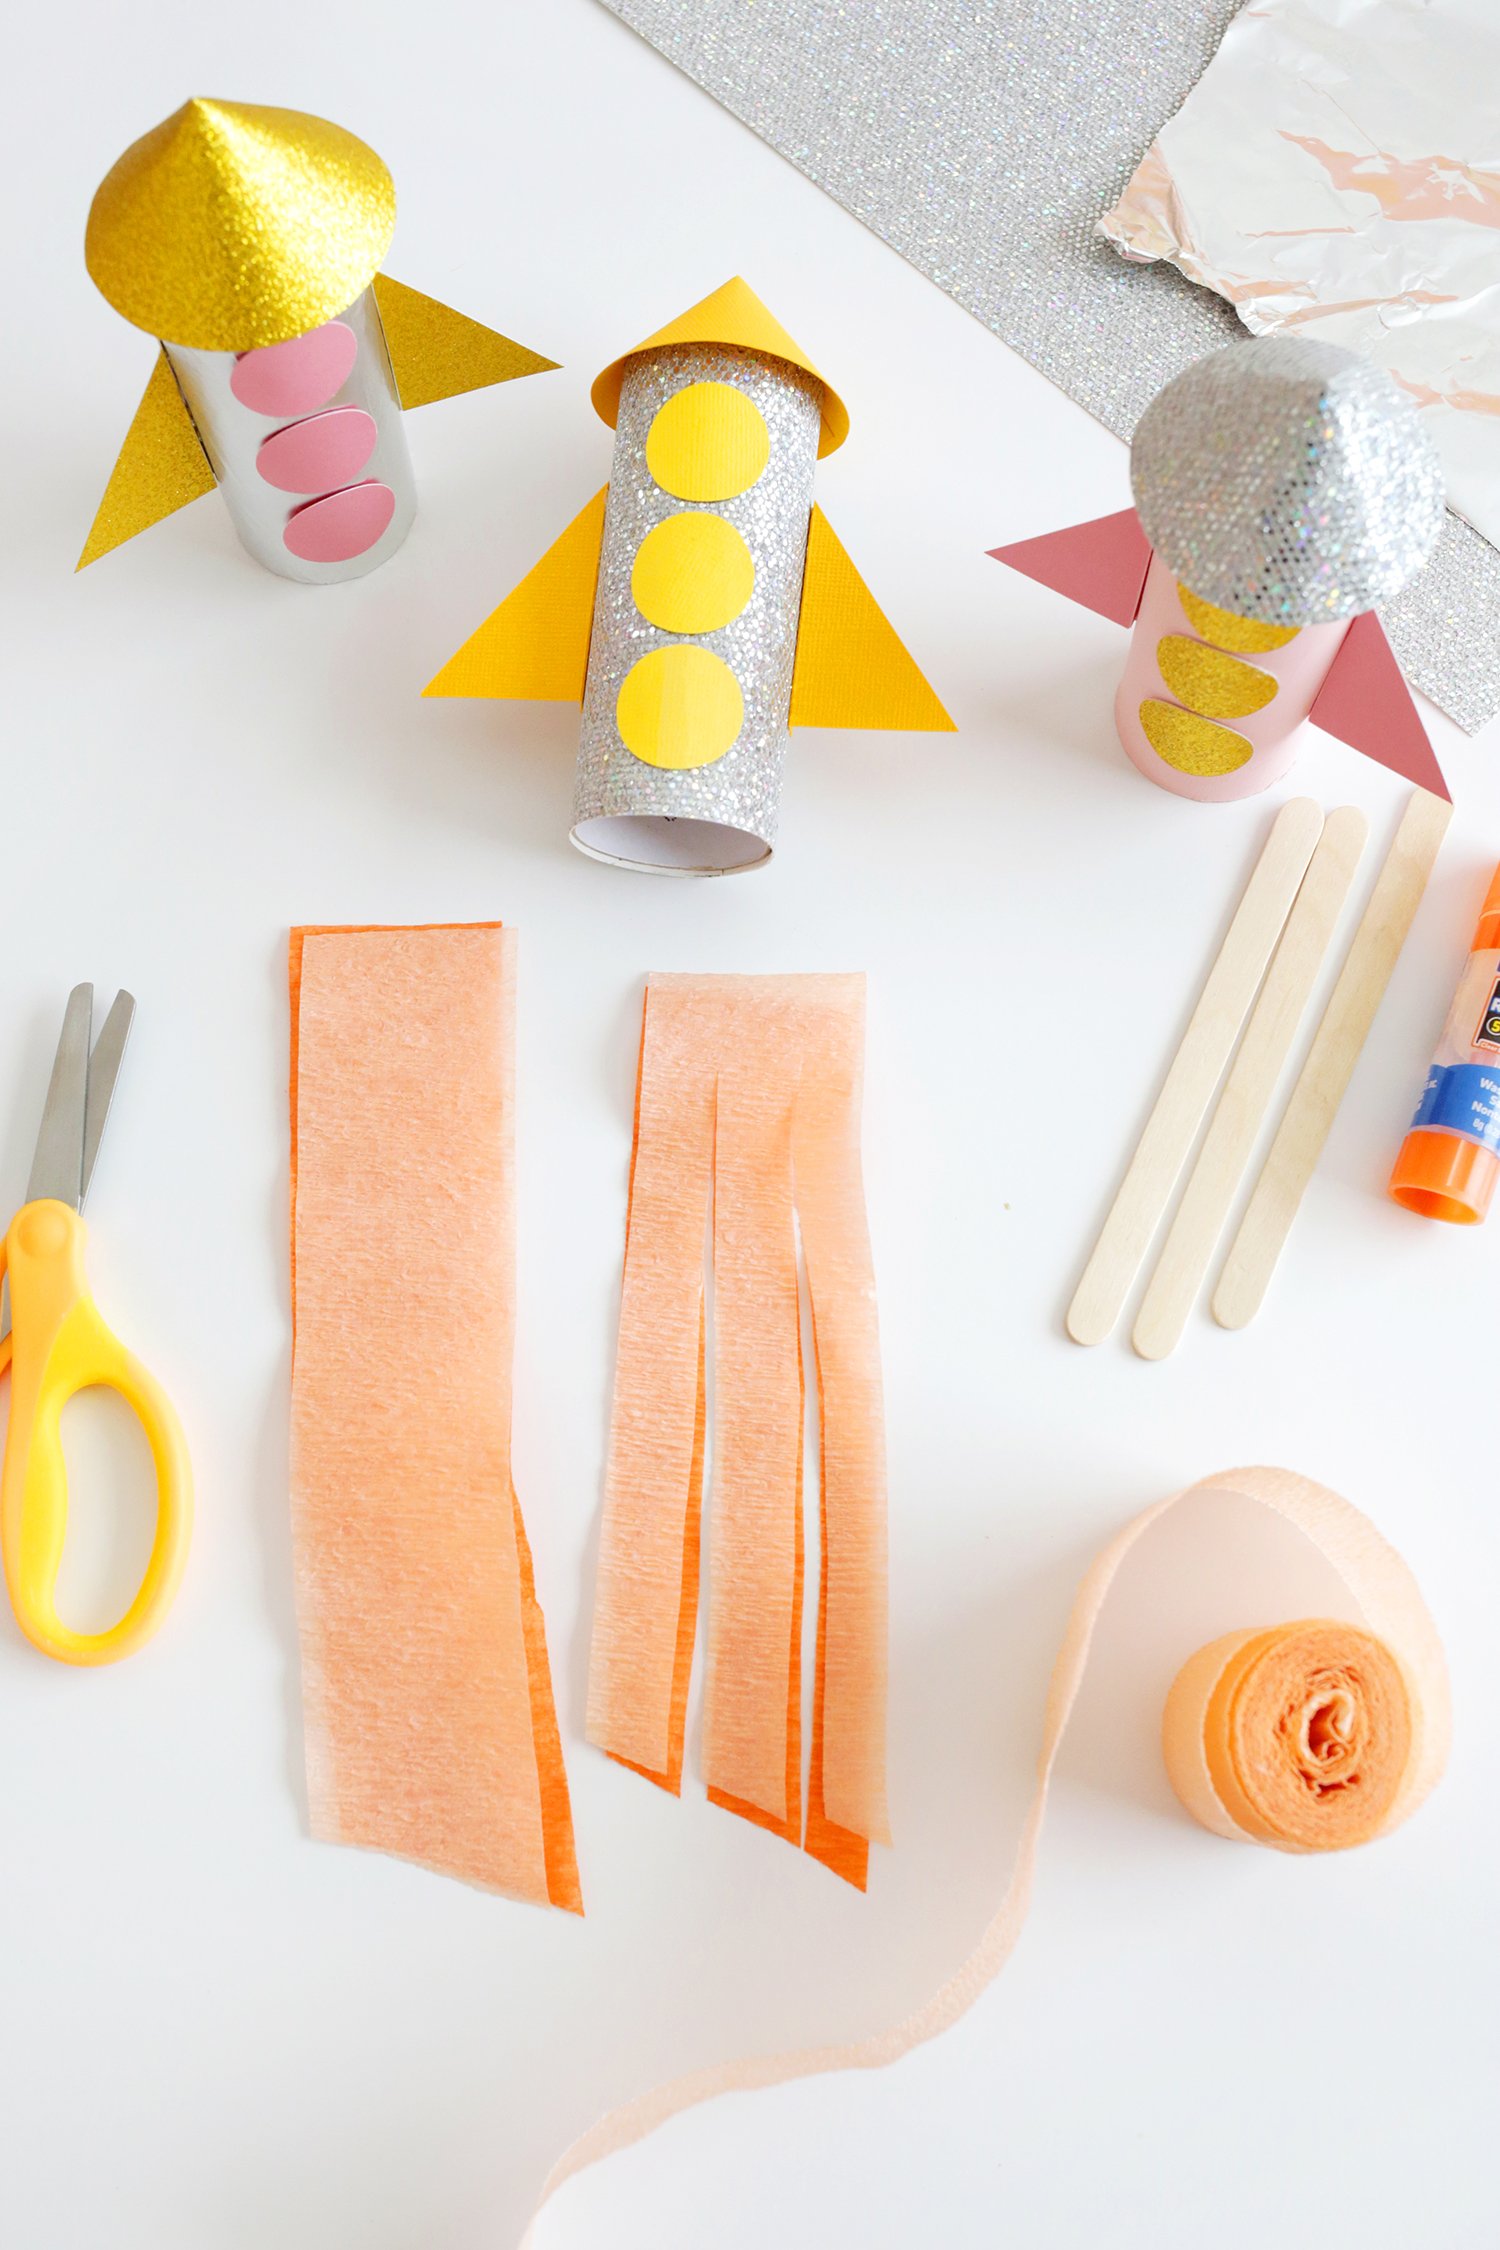 paper rocket ships with crepe paper flames being cut